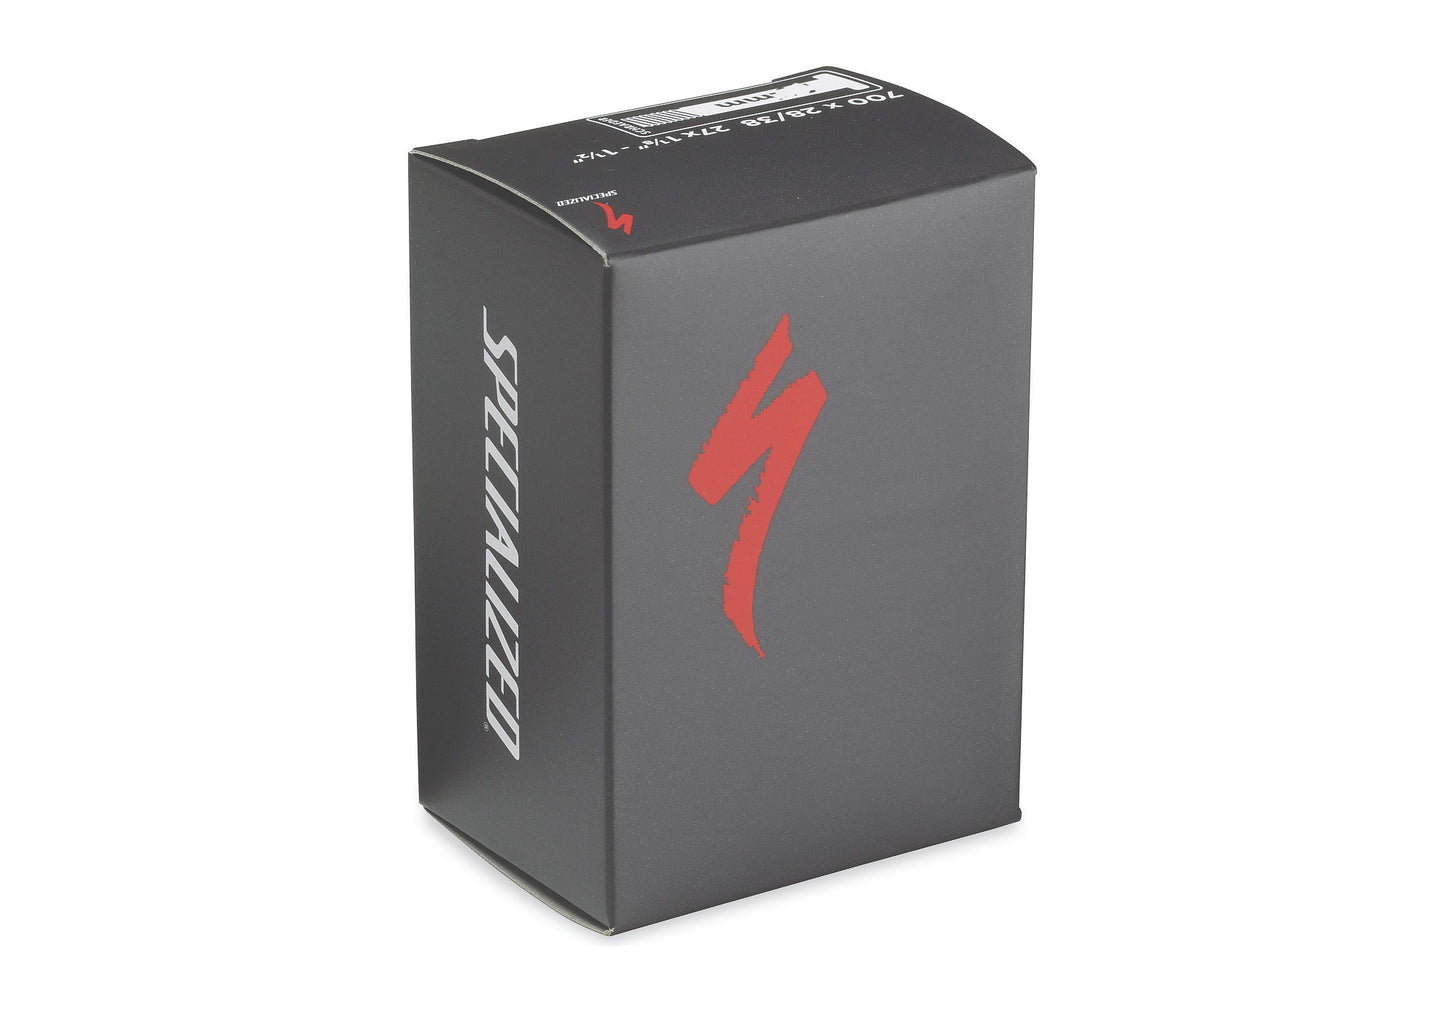 Specialized Schrader Valve Bicycle Tube 26x2.3-3.0"